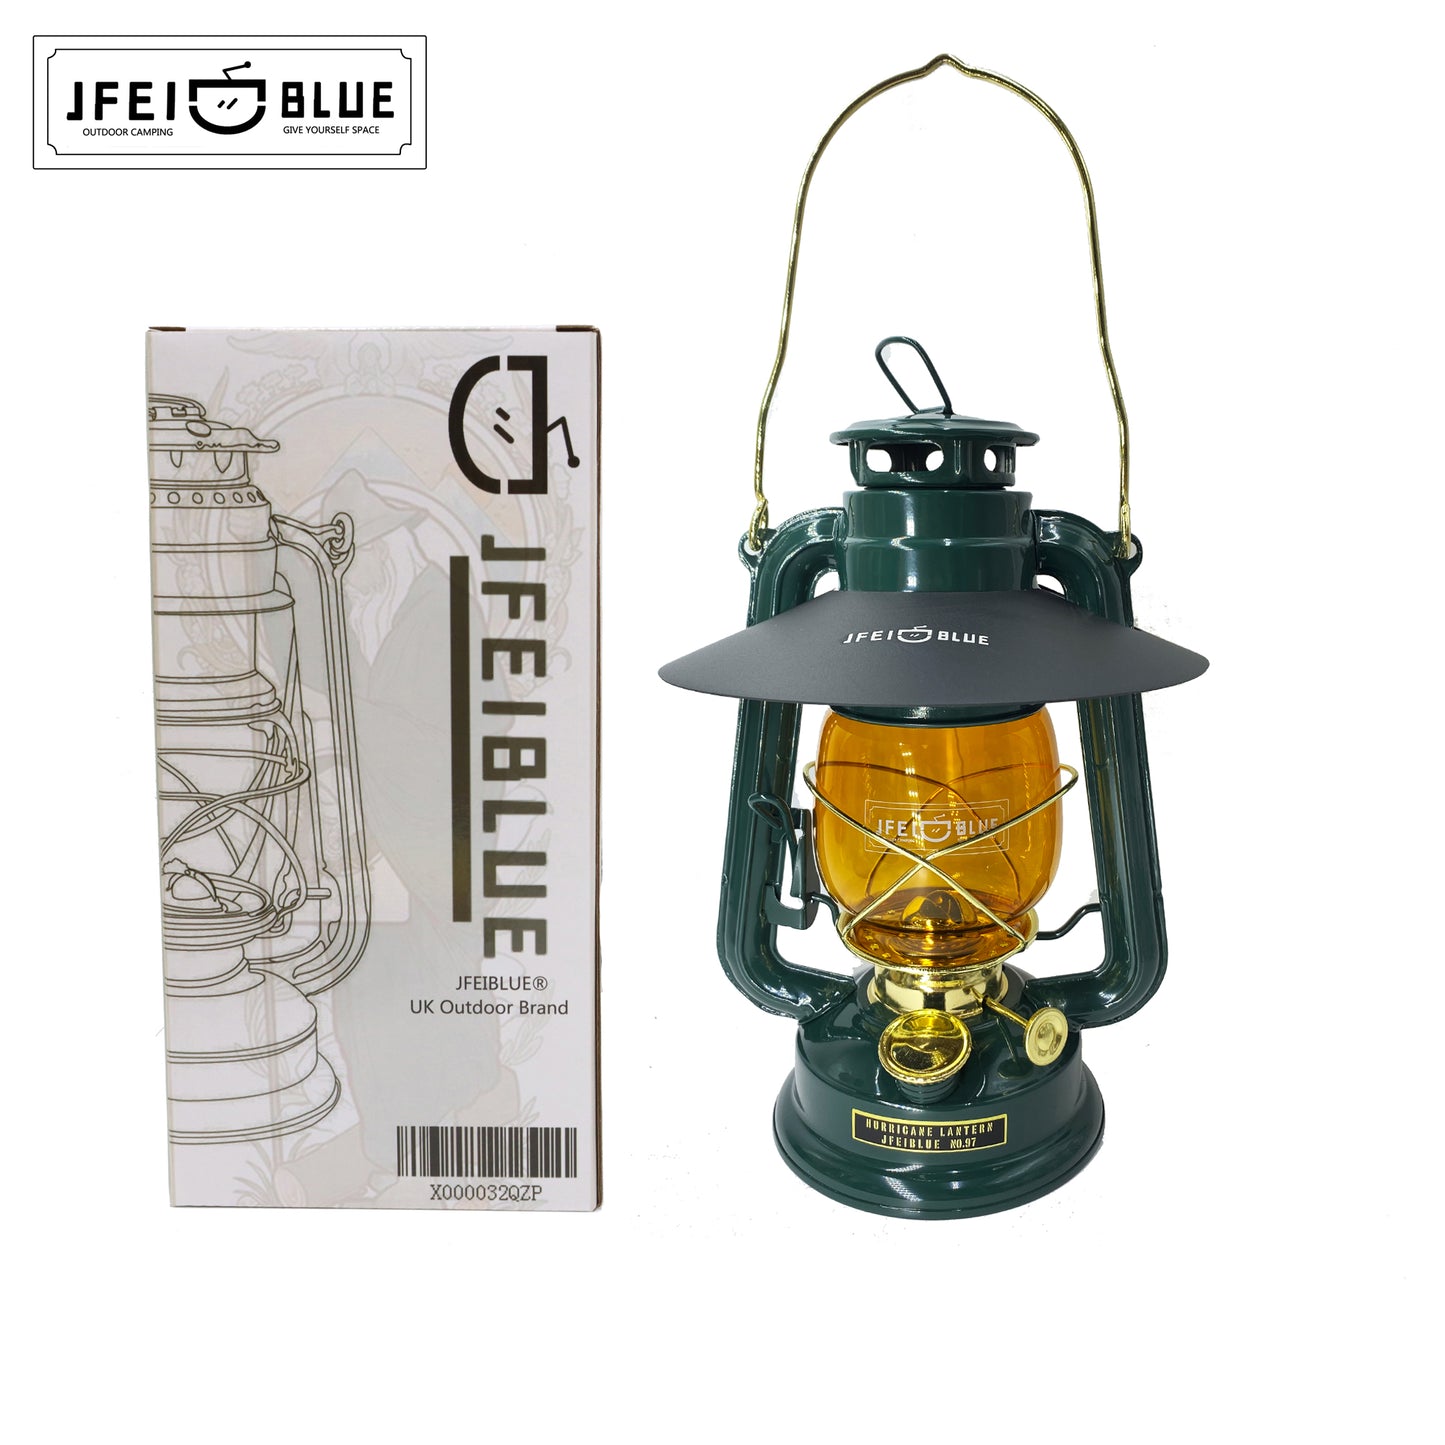 British JFEIBLUE retro traditional kerosene lamp camping lamp horse lamp outdoor portable lamp old-fashioned oil lamp military wind